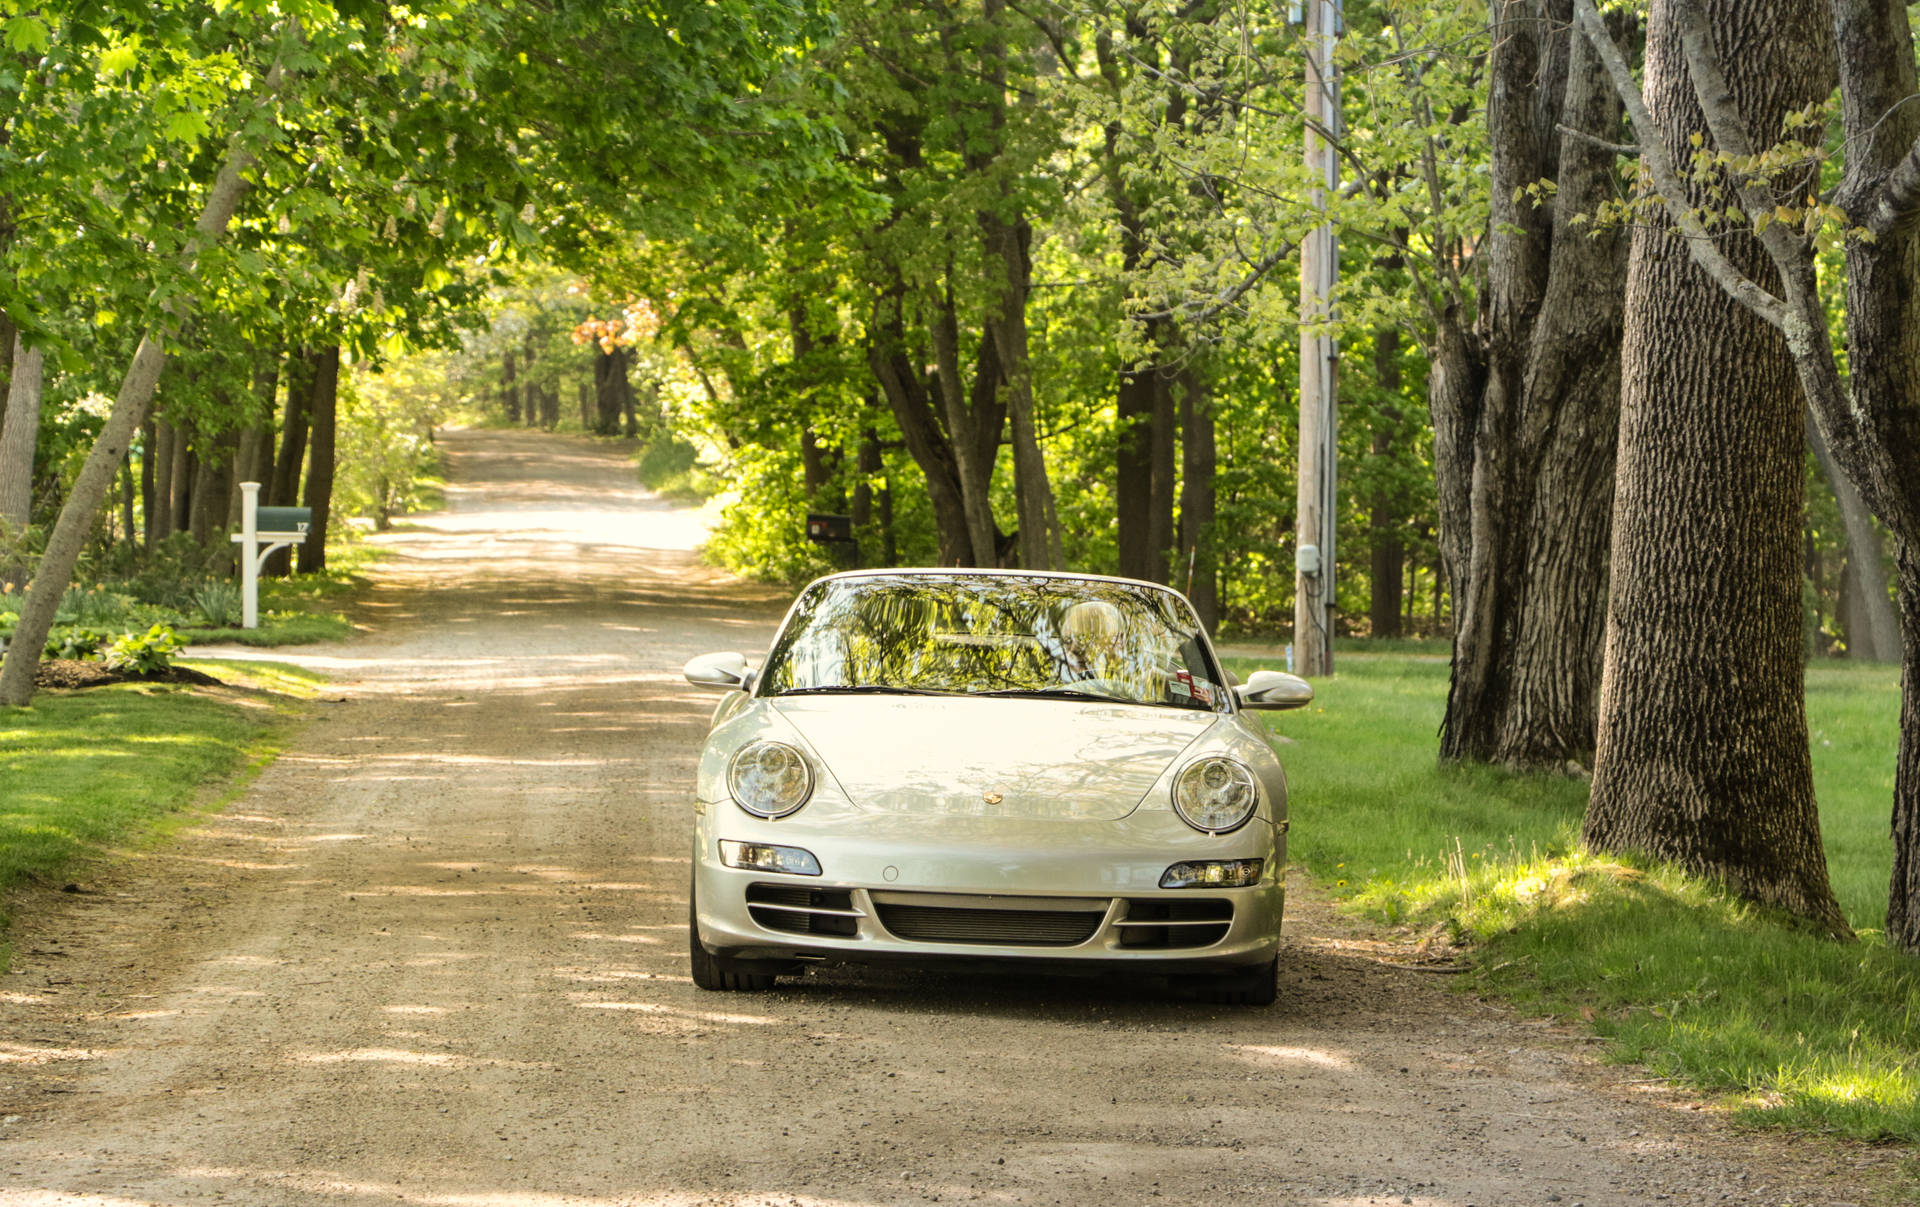 Small Luxury Car On Country Road Background